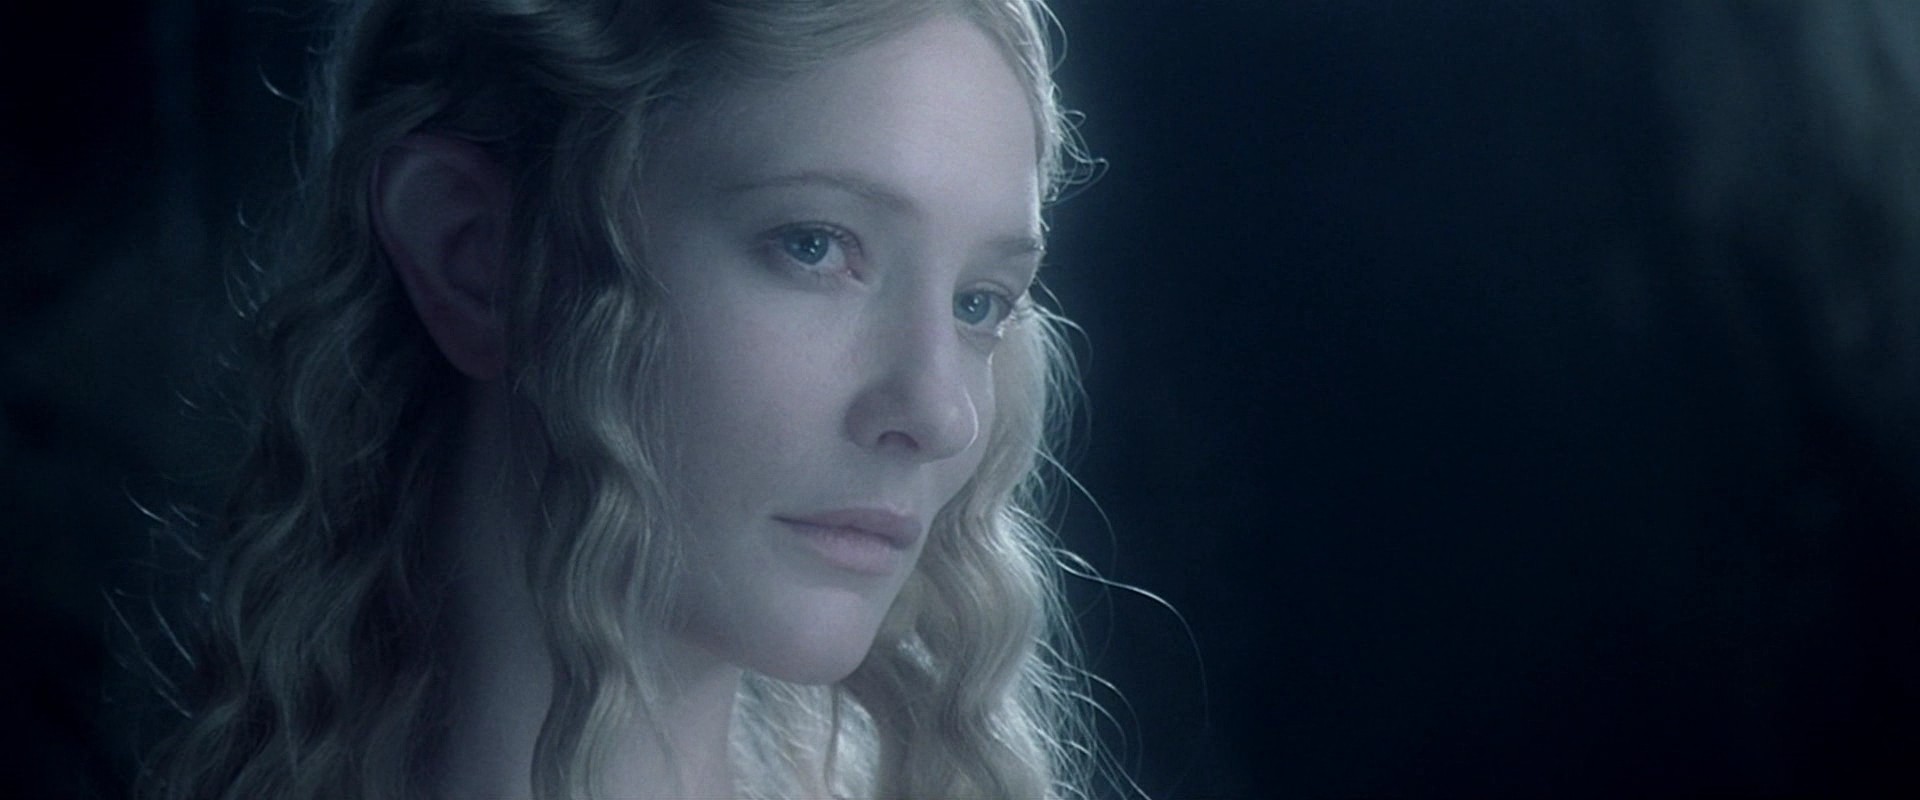 General 1920x800 movies women The Lord of the Rings Galadriel fantasy girl film stills blonde actress Cate Blanchett